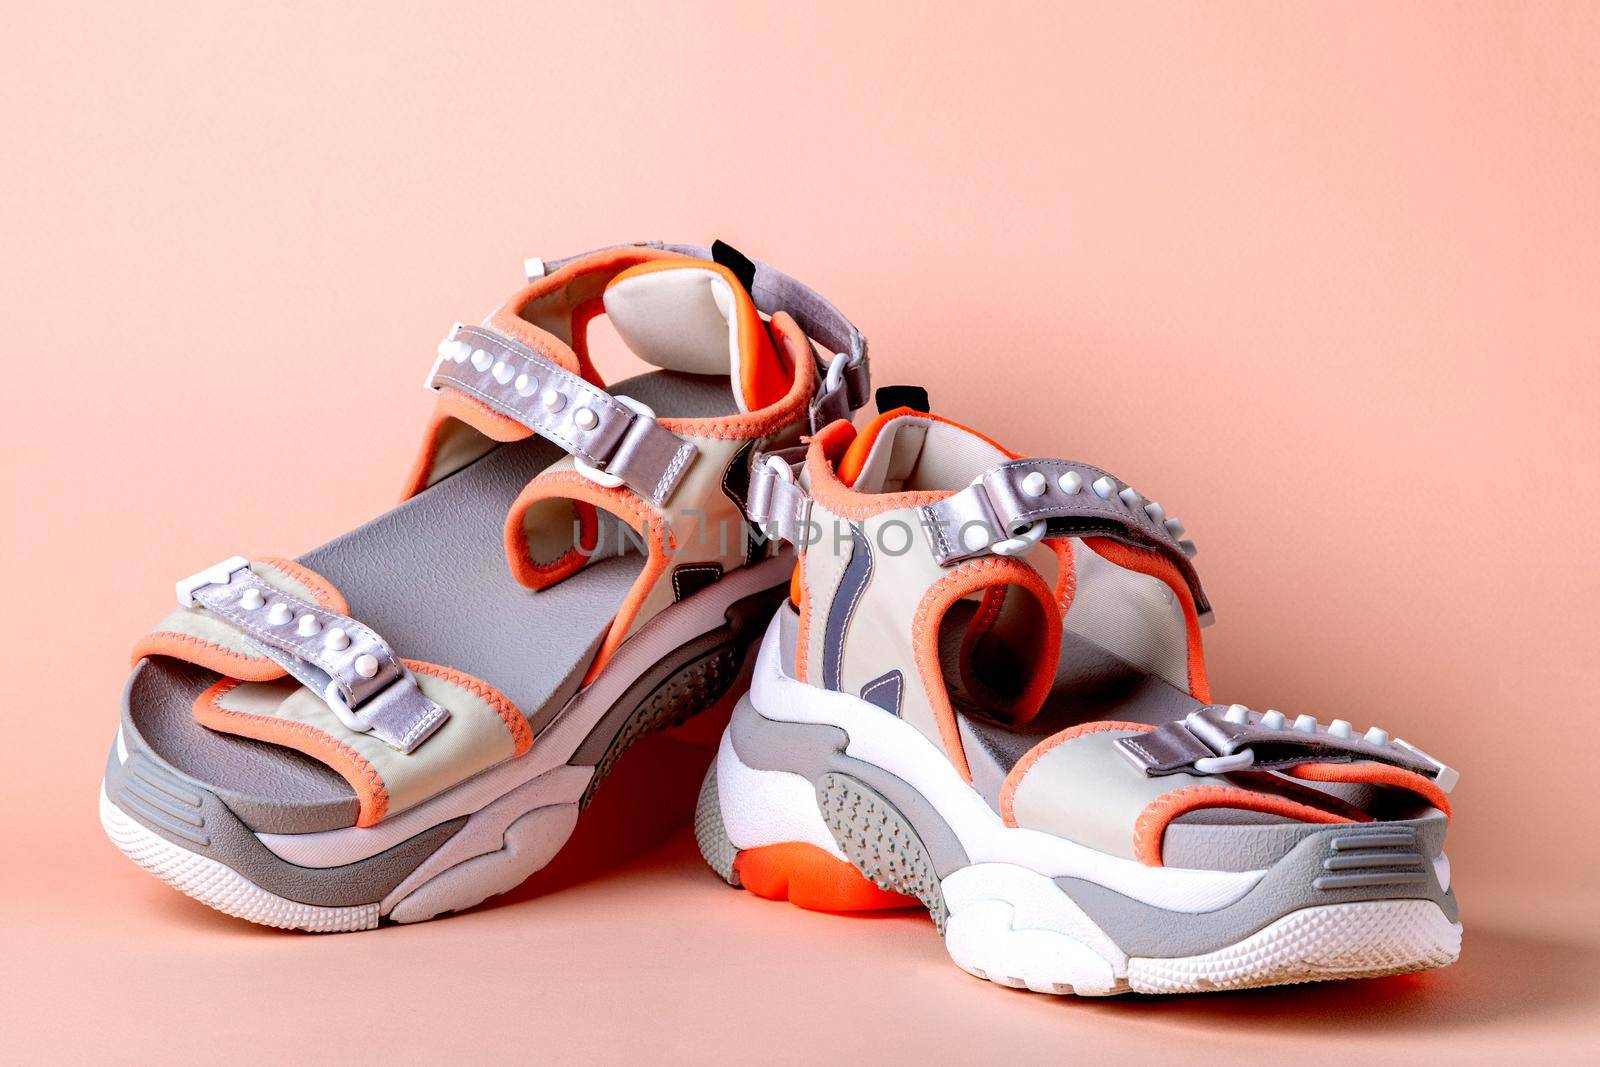 Women's, fashionable, sports sandals with orange accents on a pink background. New youth shoes for girls. Front view.